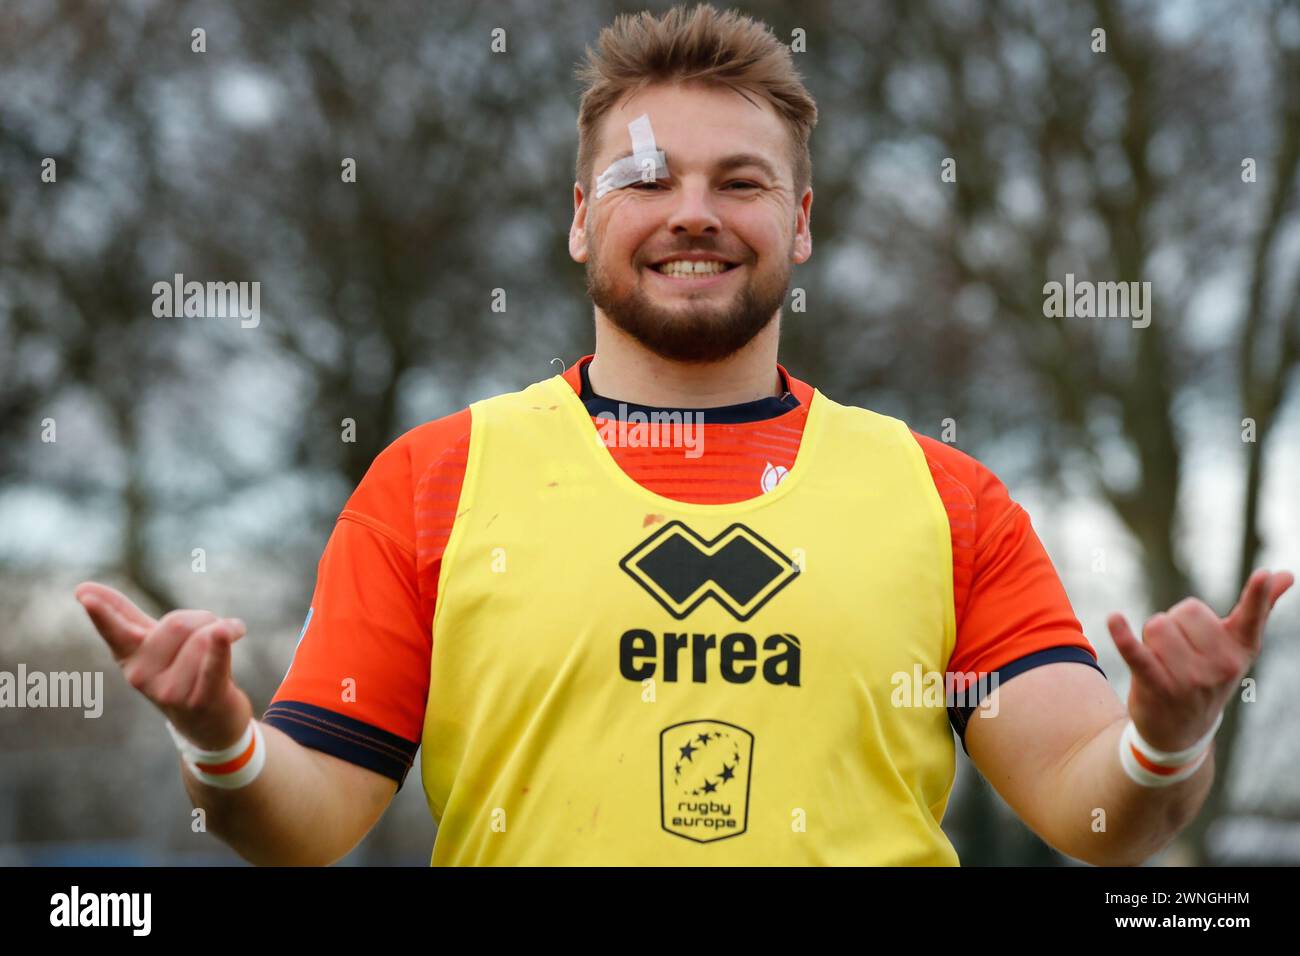 AMSTERDAM, NETHERLANDS - MARCH 02: David Anderson player of Haagsche RC during the International Rugby Europe Championship match between The Netherlan Stock Photo